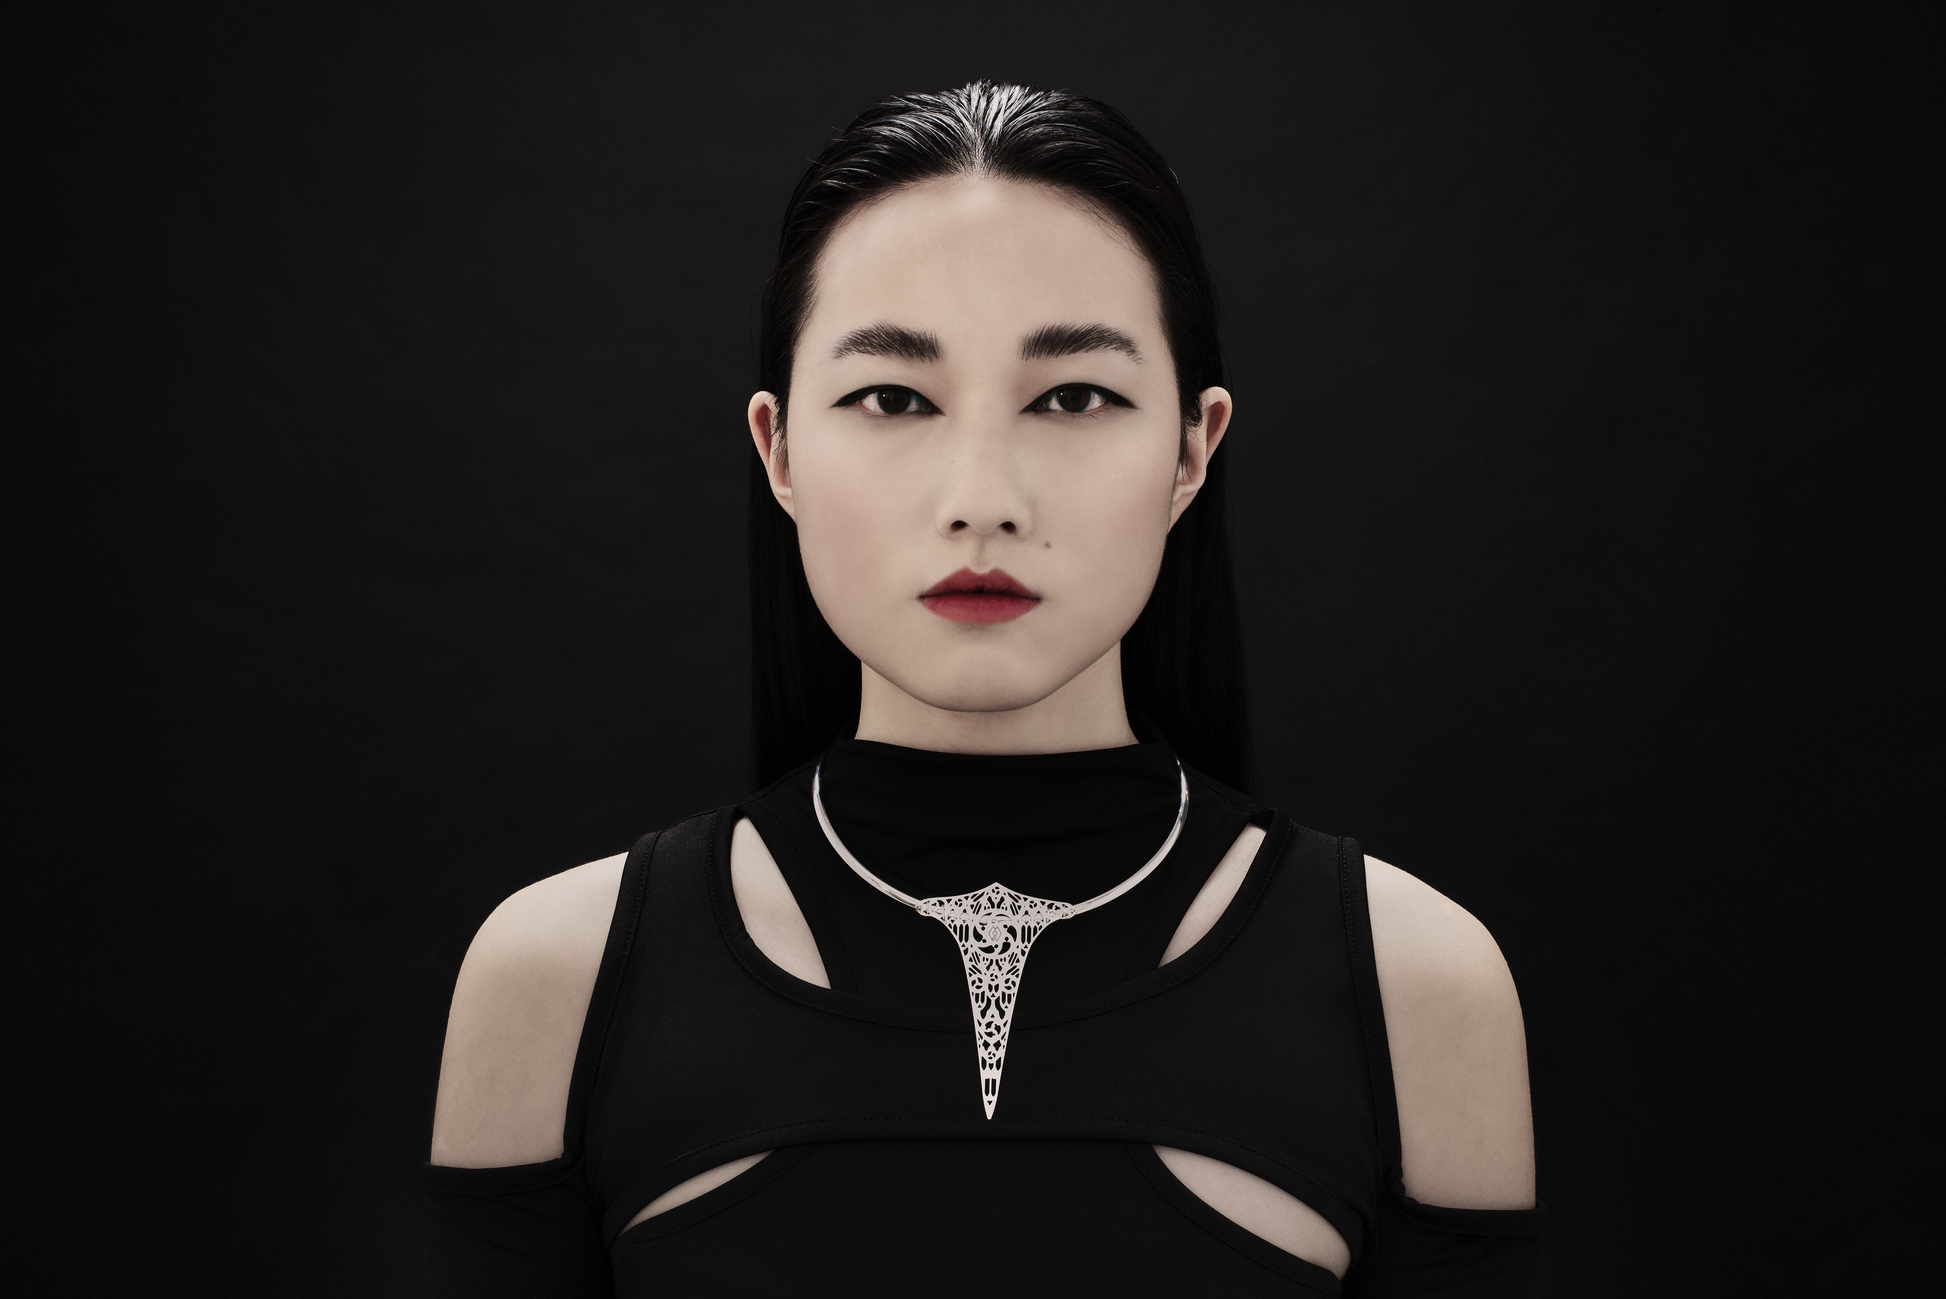 A model from Myril Jewels elegantly wears a rigid V-shaped necklace featuring a gothic churches motif. This piece is a testament to neo-gothic design, perfect for anyone who adores dark-avantgarde accessories, and is versatile enough for Halloween, everyday wear, or as a standout piece at a festival.